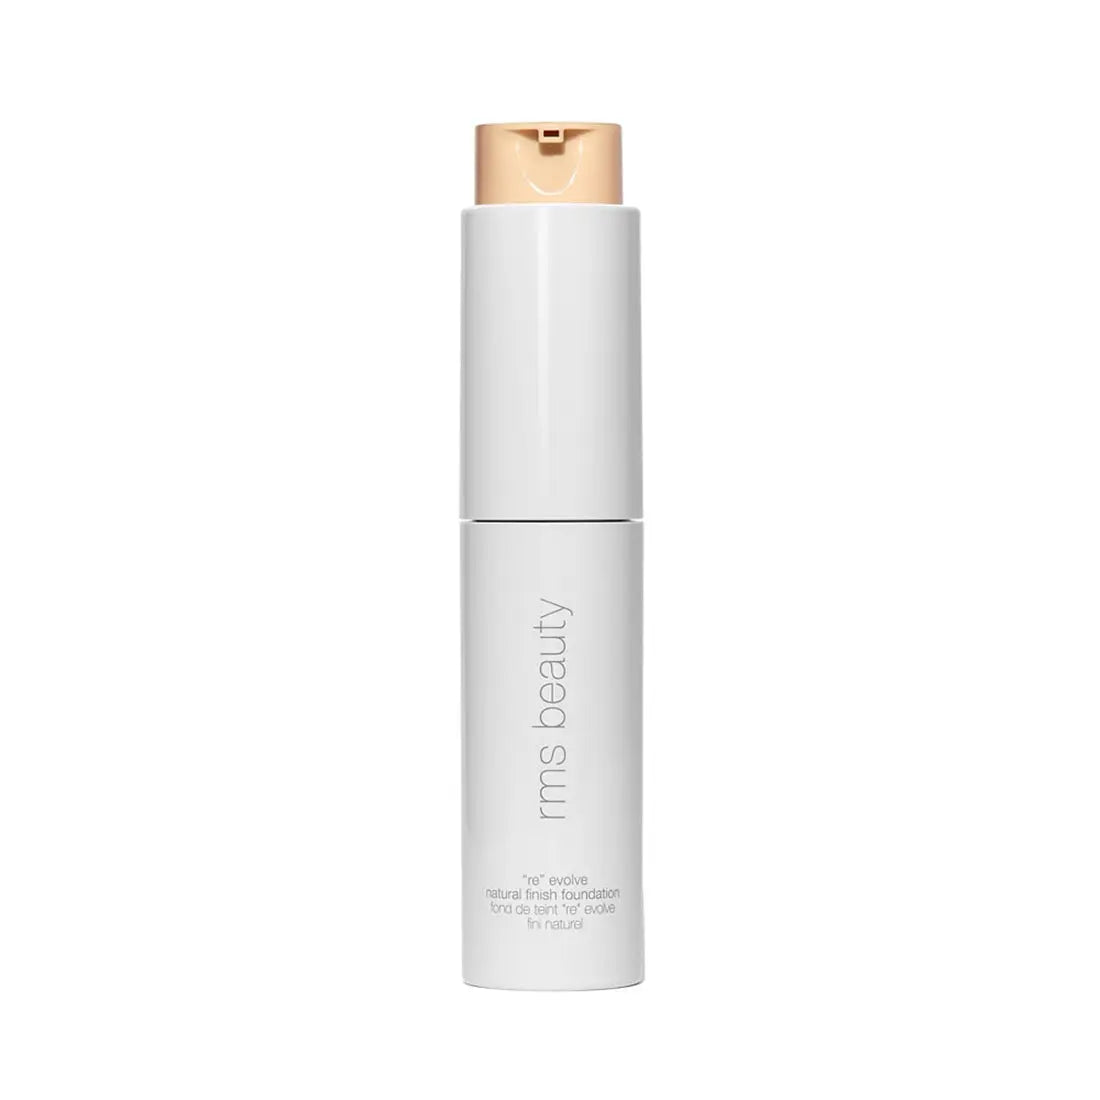 RMS Beauty ReEvolve Natural Finish Foundation, 29ml - 000